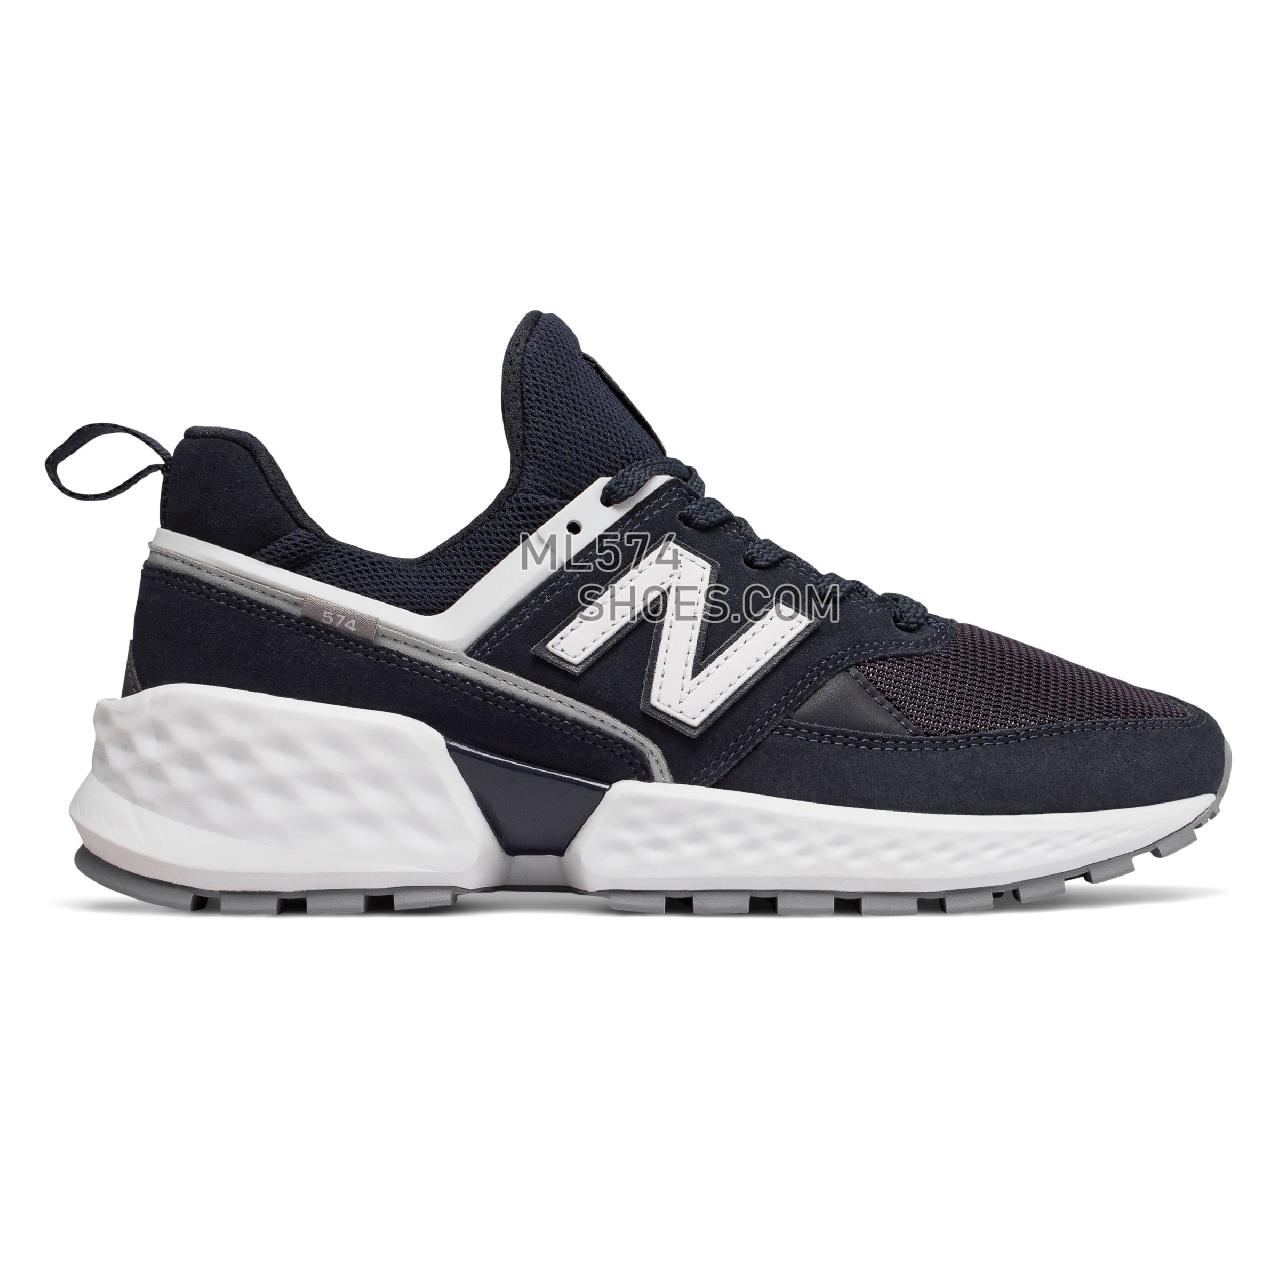 New Balance 574 Sport - Men's Sport Style Sneakers - Eclipse with White - MS574NSA